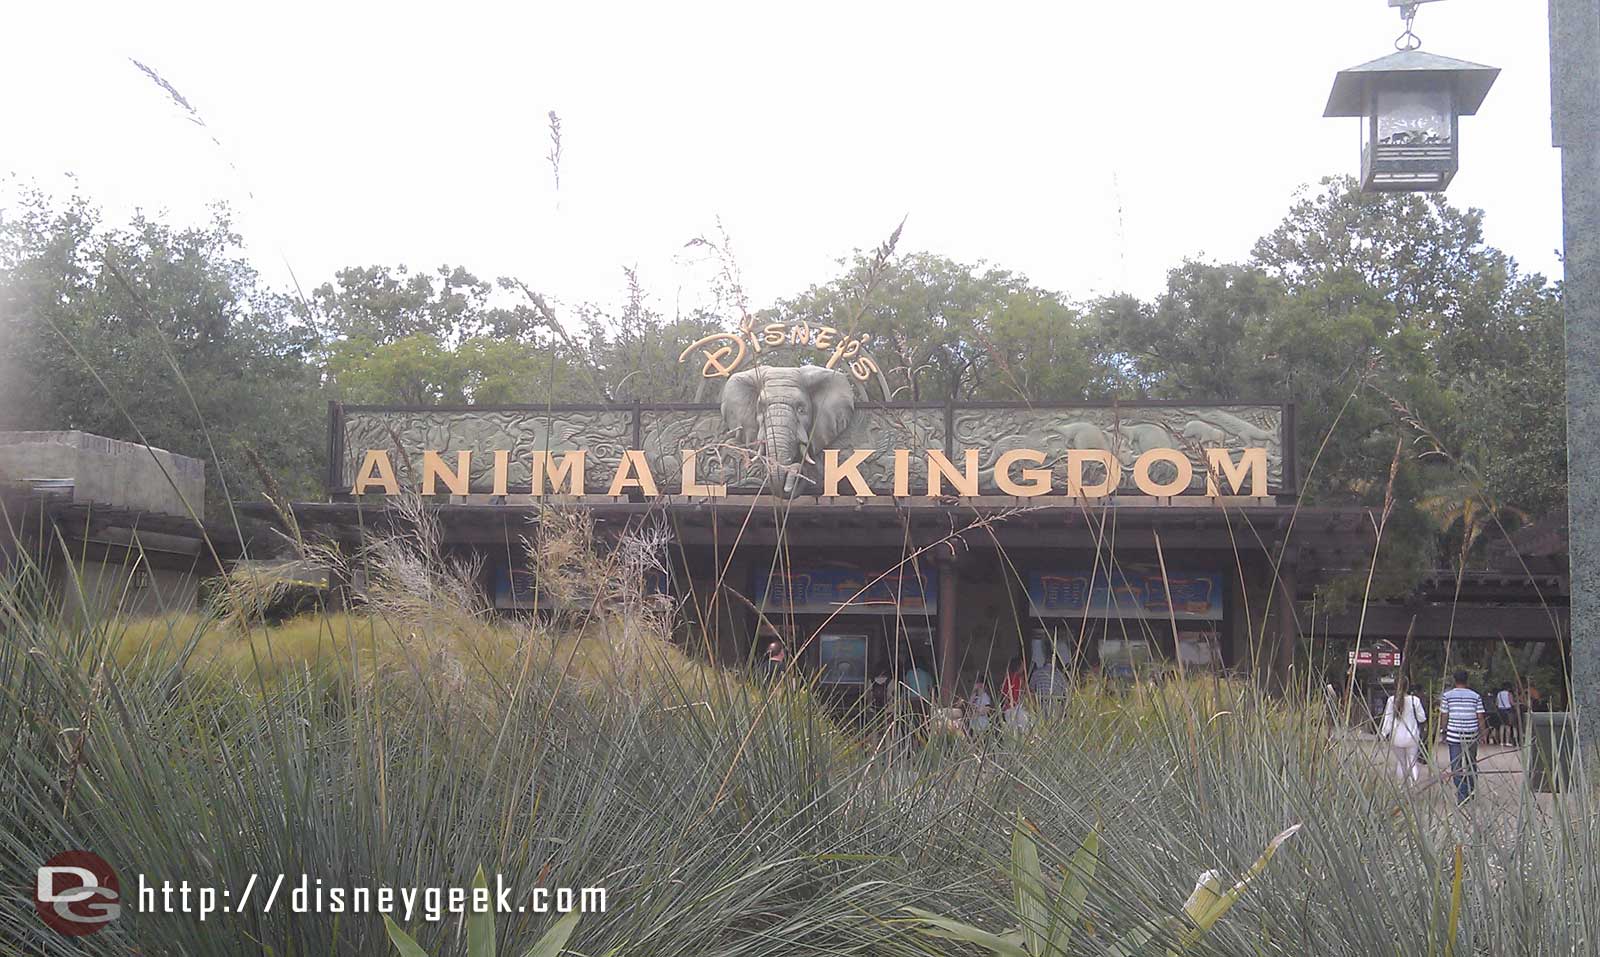 Arriving at Disneys Animal Kingdom for the afternoon.